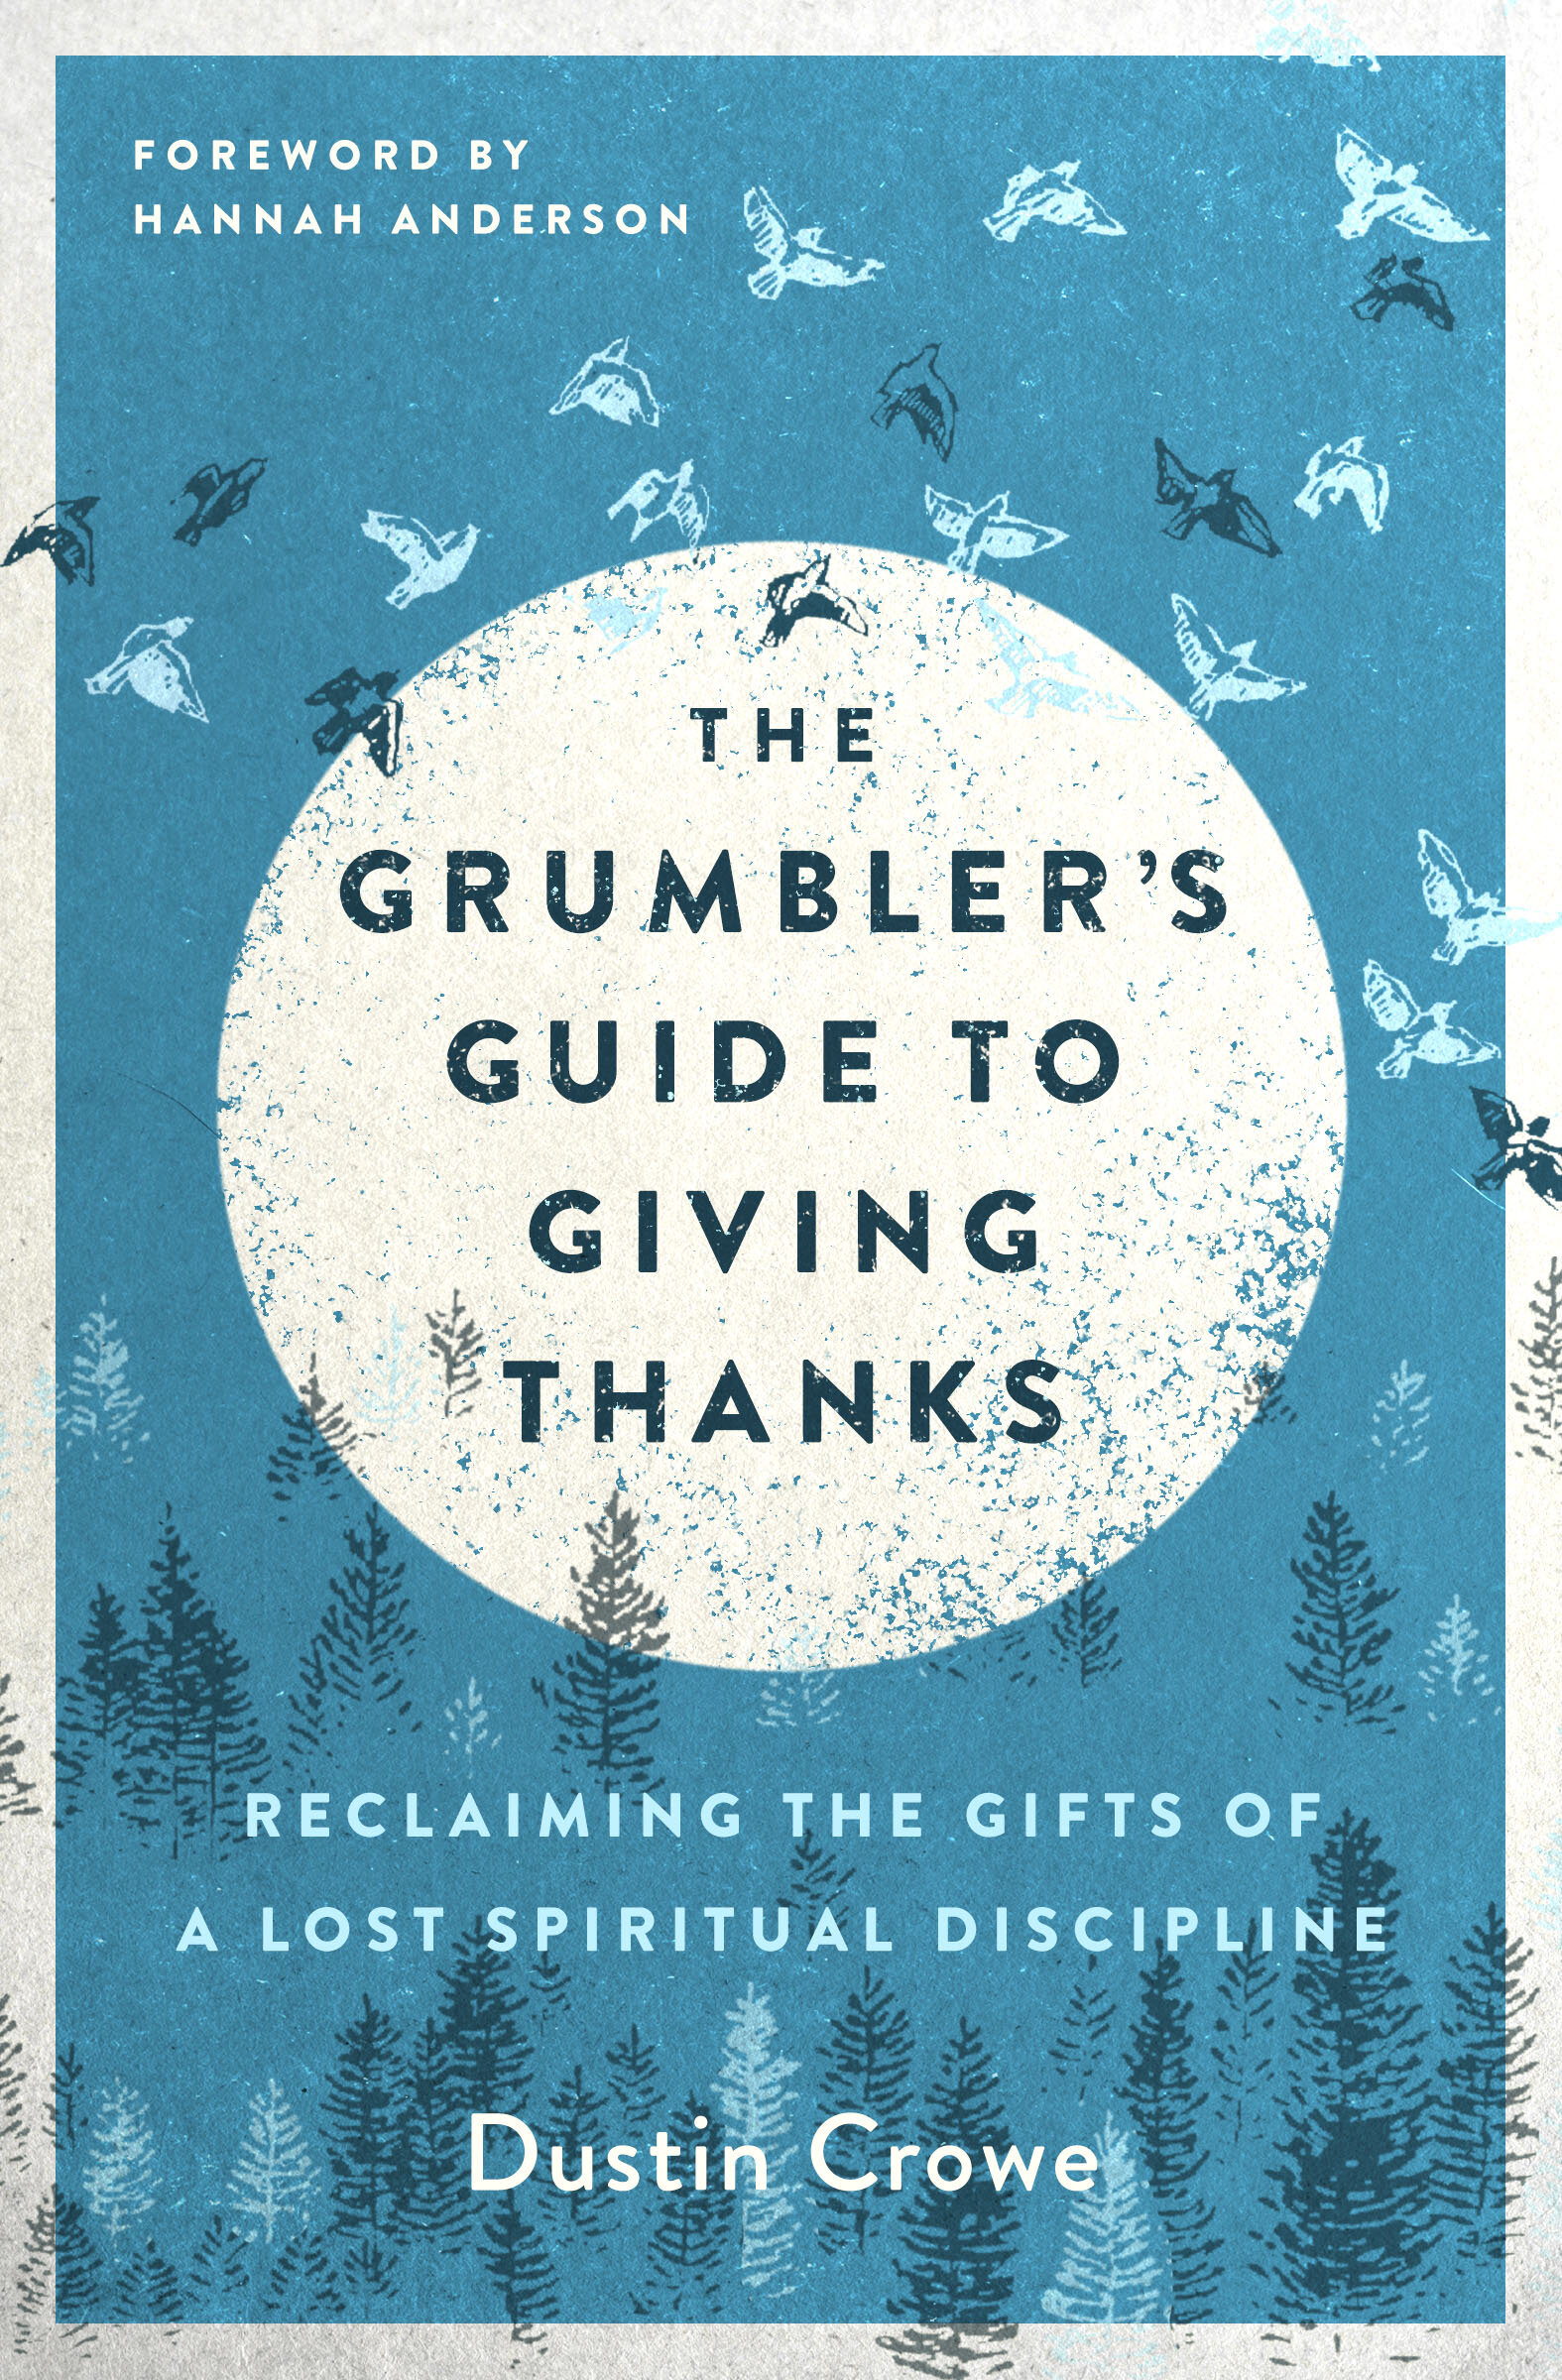 The Grumbler's Guide to Giving Thanks: Reclaiming the Gifts of a Lost Spiritual Discipline